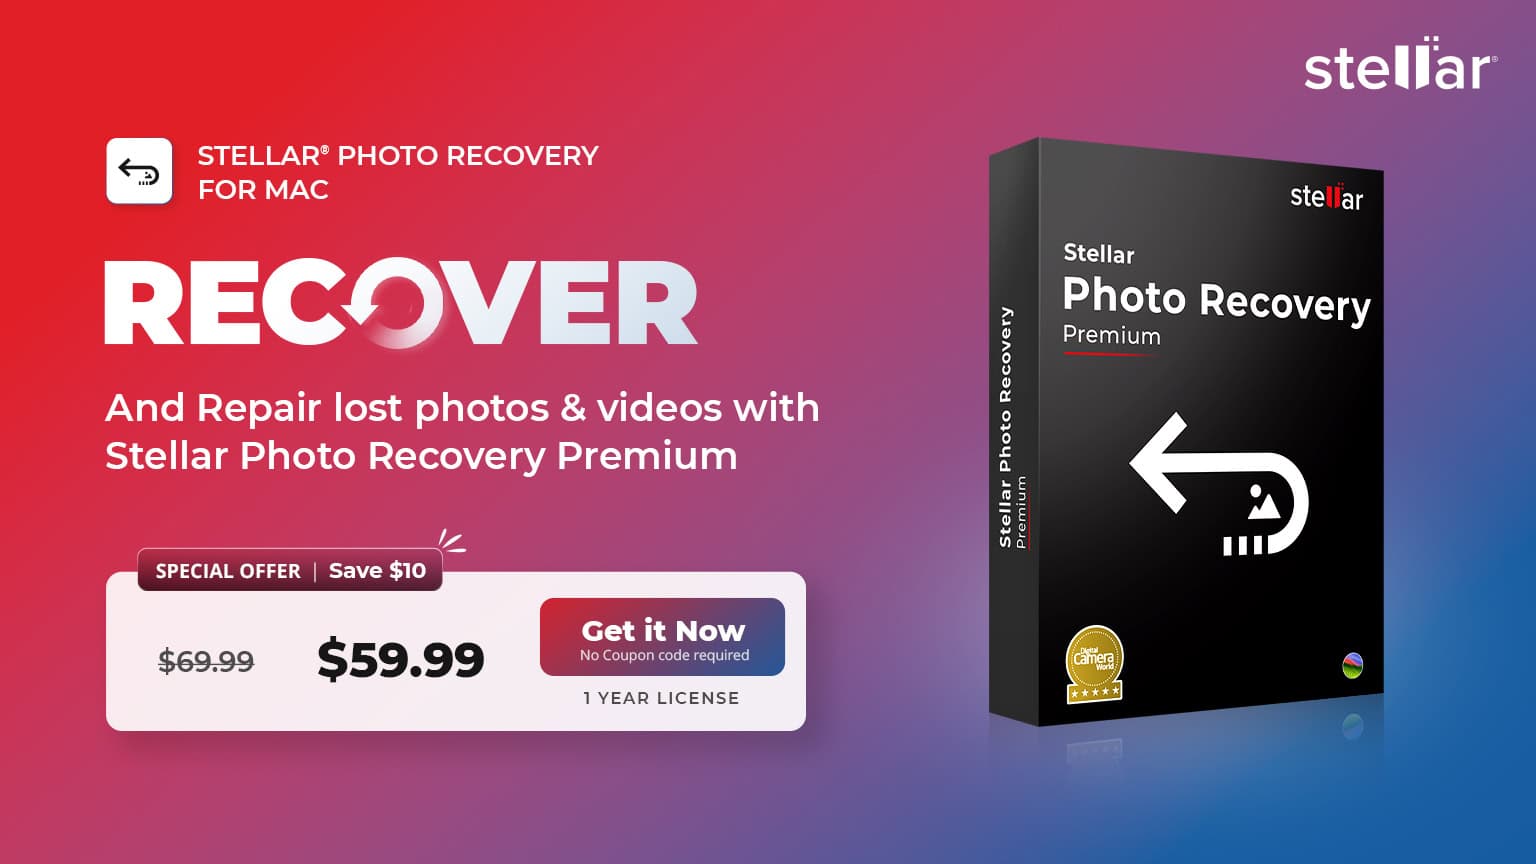 RECOVER and repair lost photos & videos with Stellar Photo Recovery Premium. Special Offer, Save $10 at $59.99. Get it now, no coupon code required!